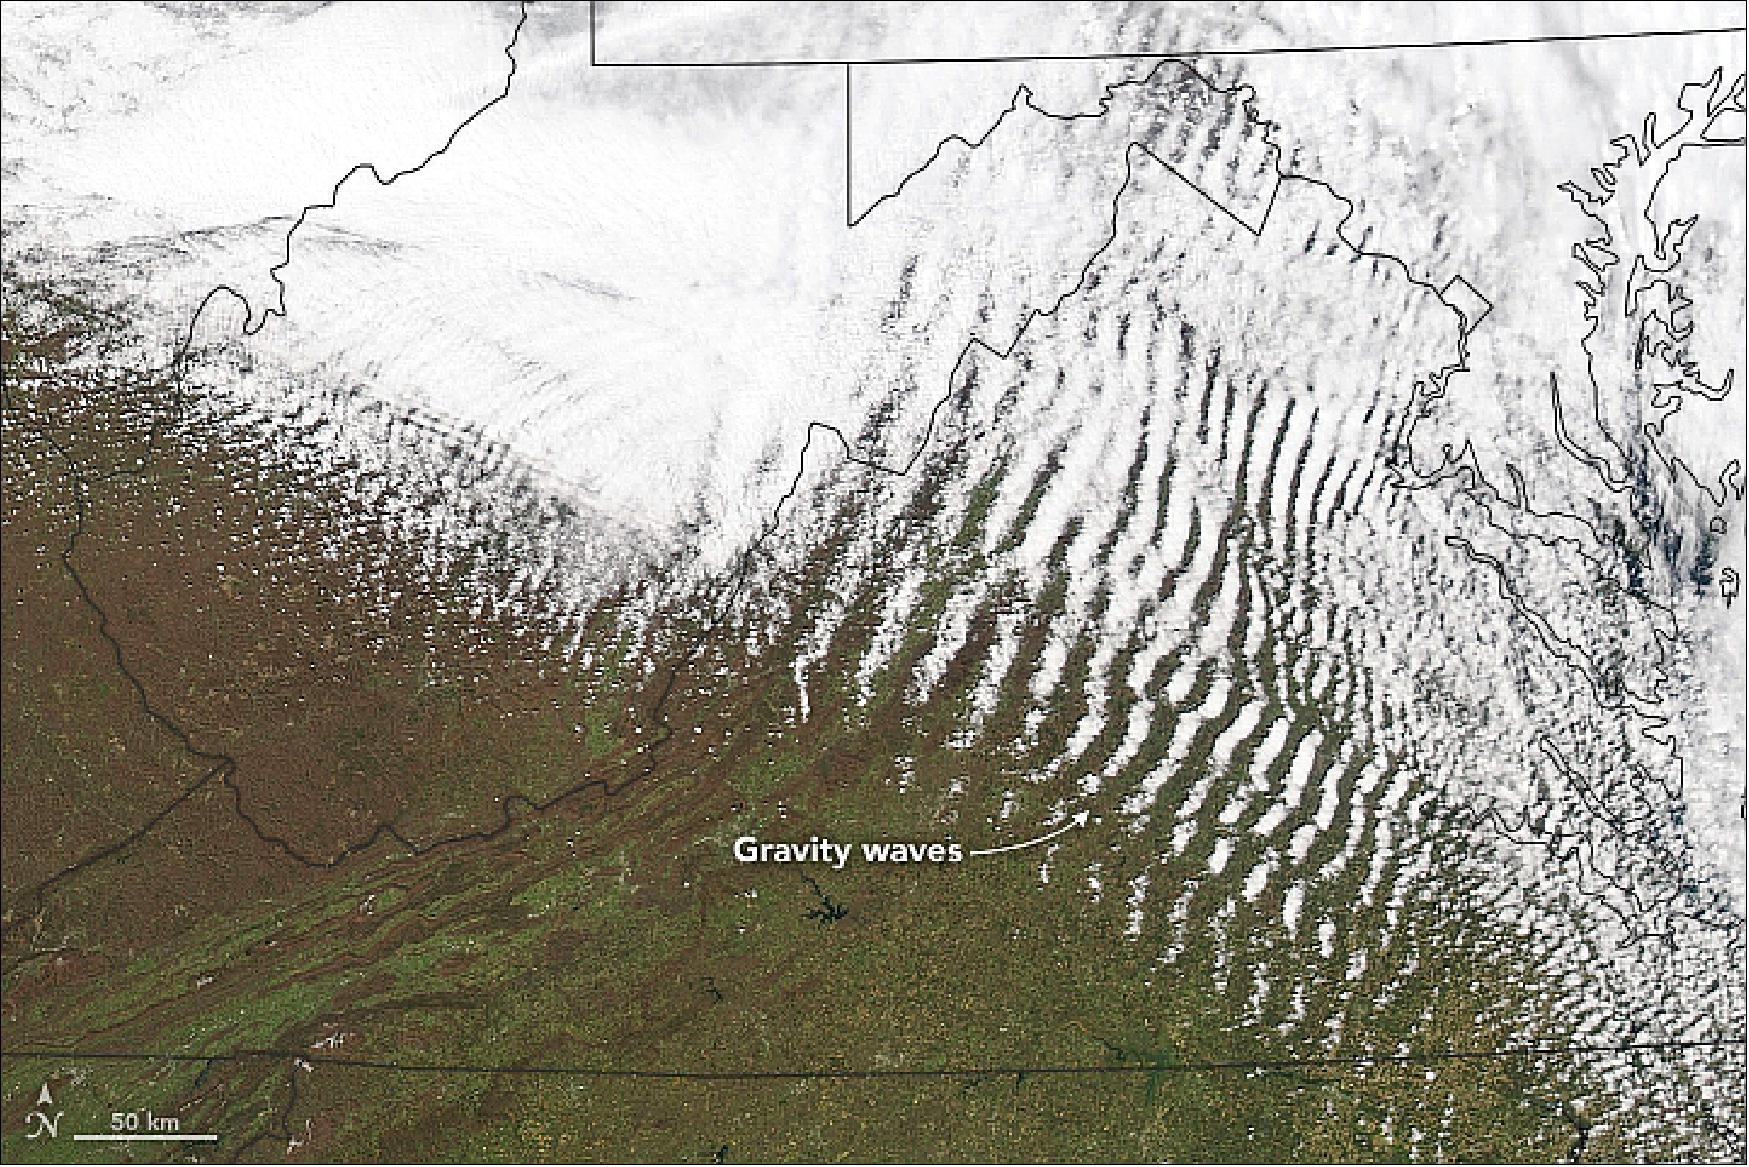 Figure 72: MODIS on NASA's Aqua satellite captured this image of the wave clouds. Below the clouds, signs of spring washed through the region, with forests in the Piedmont of North Carolina and Virginia showing widespread greening even as the cooler mountain areas remained brown. In the large image, the abundance of farms in the coastal plain gives that region a yellower color (image credit: NASA Earth Observatory, image by Joshua Stevens, using MODIS data from LANCE/EOSDIS Rapid Response, story by Adam Voiland)